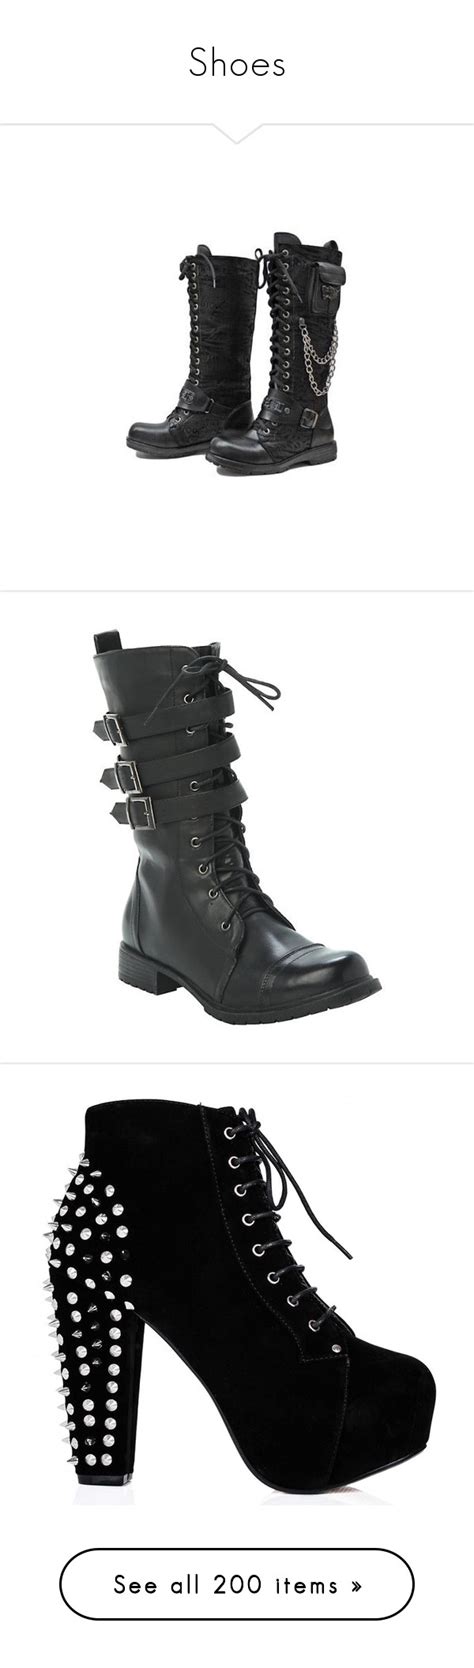 Shoes By Xxstay Goldxx Liked On Polyvore Featuring Shoes Boots Goth